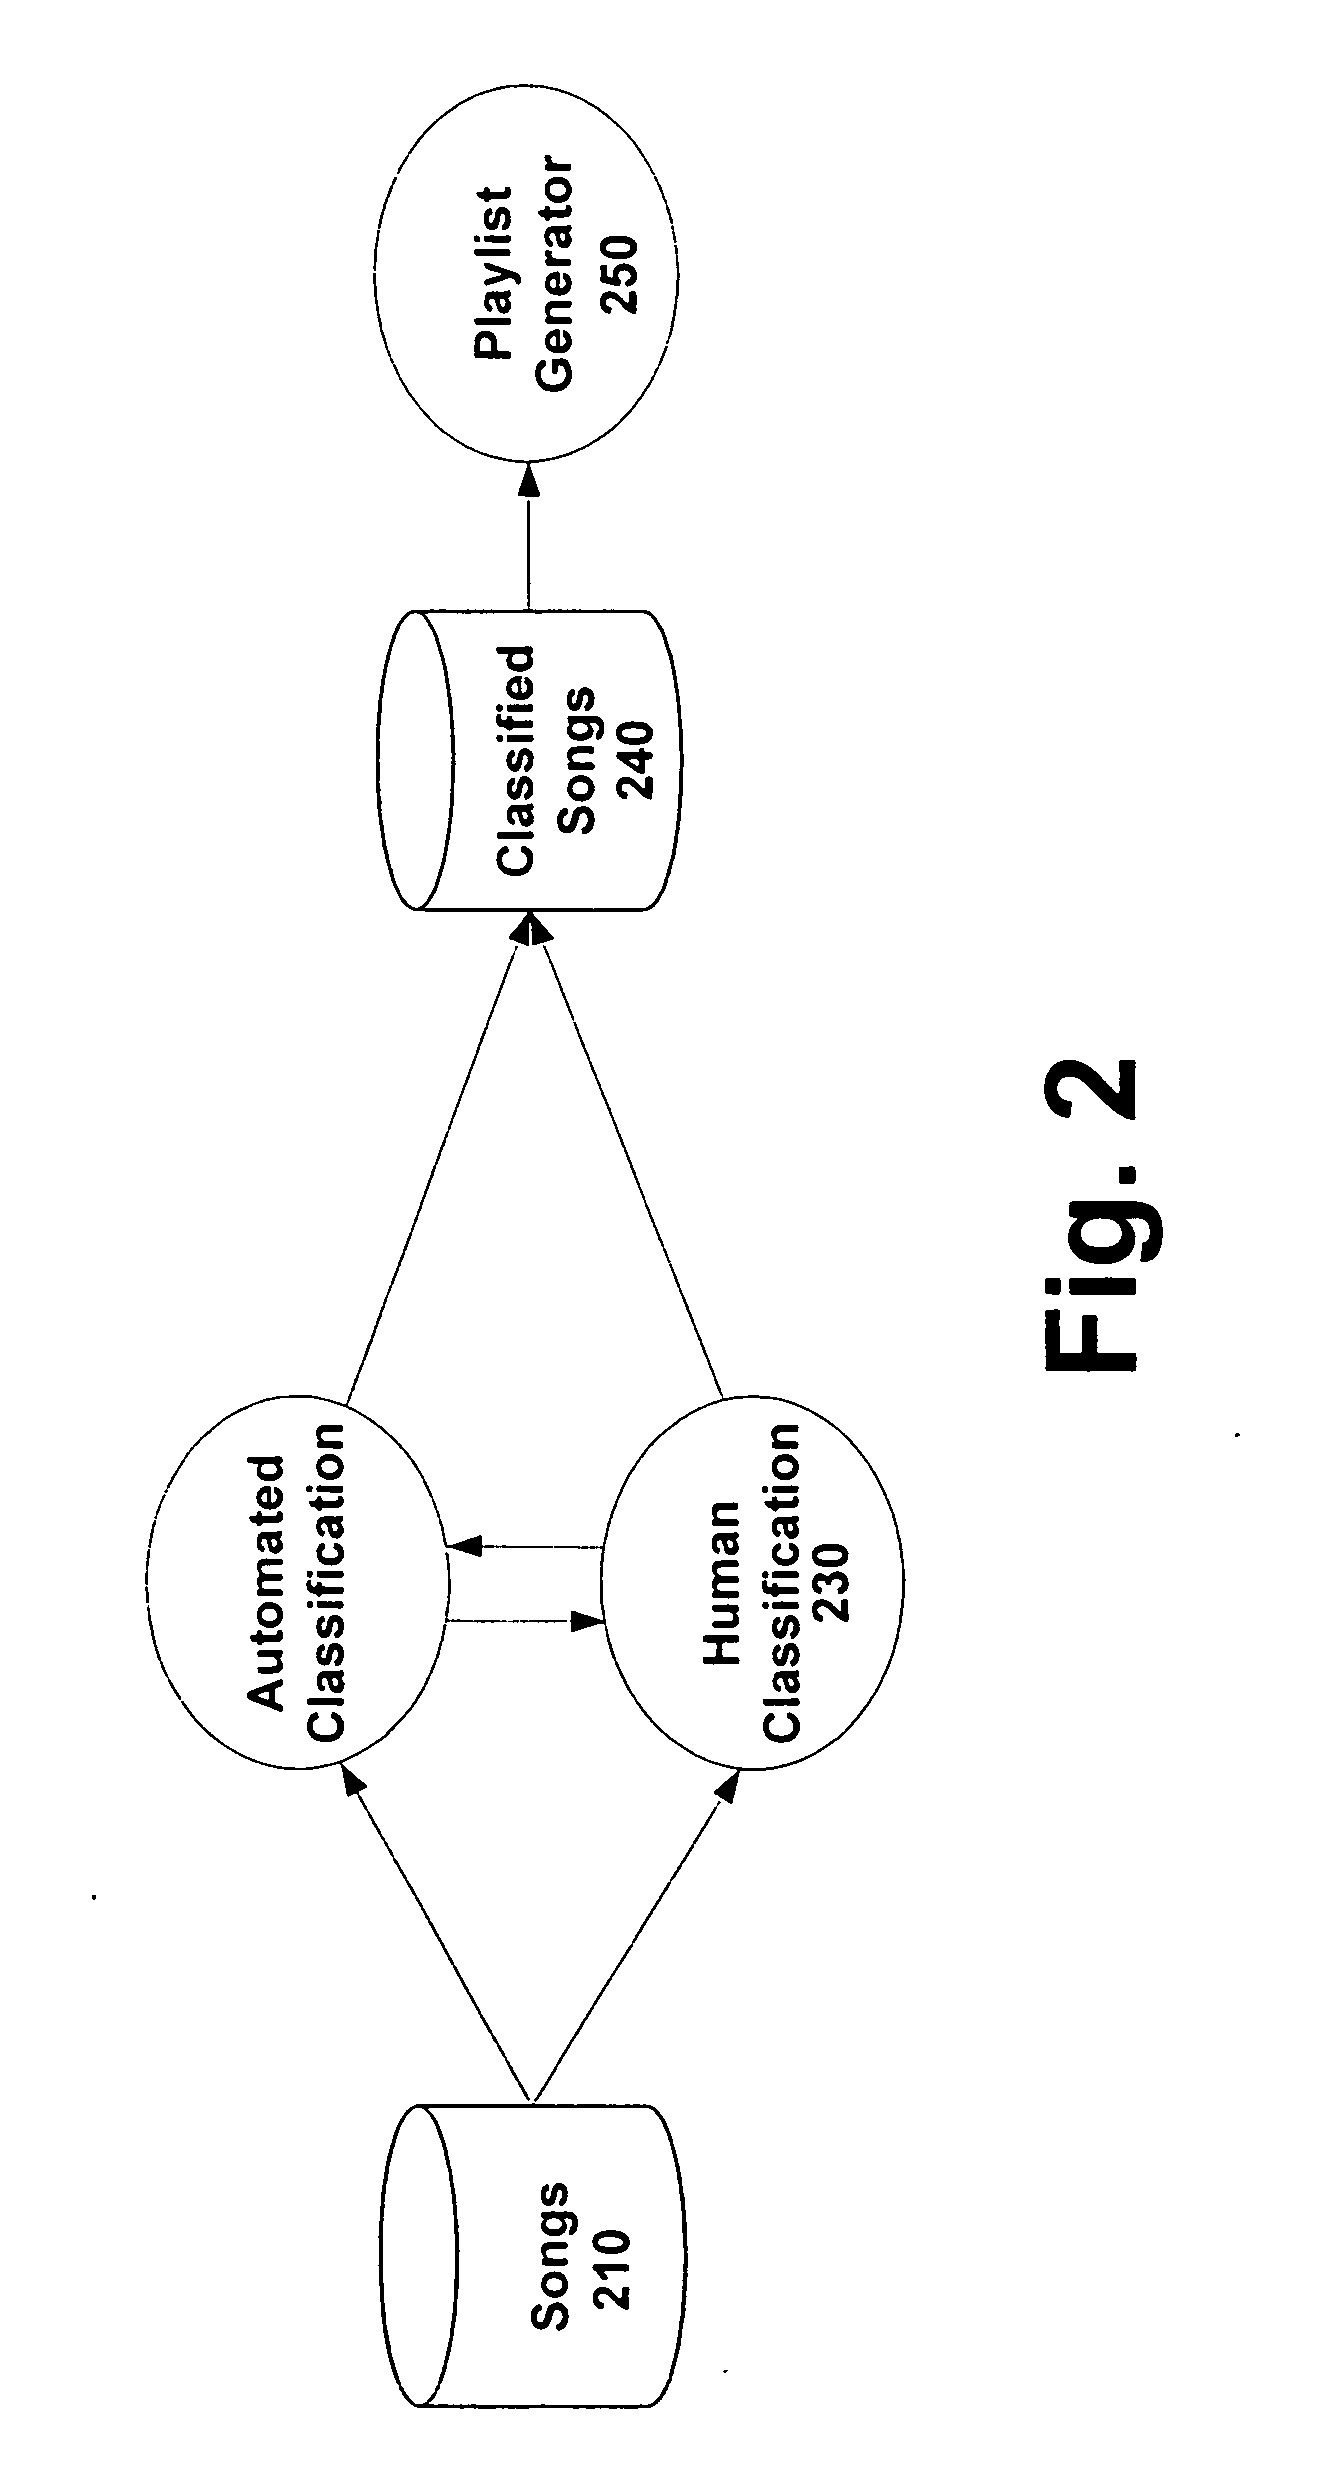 System and methods for providing automatic classification of media entities according to tempo